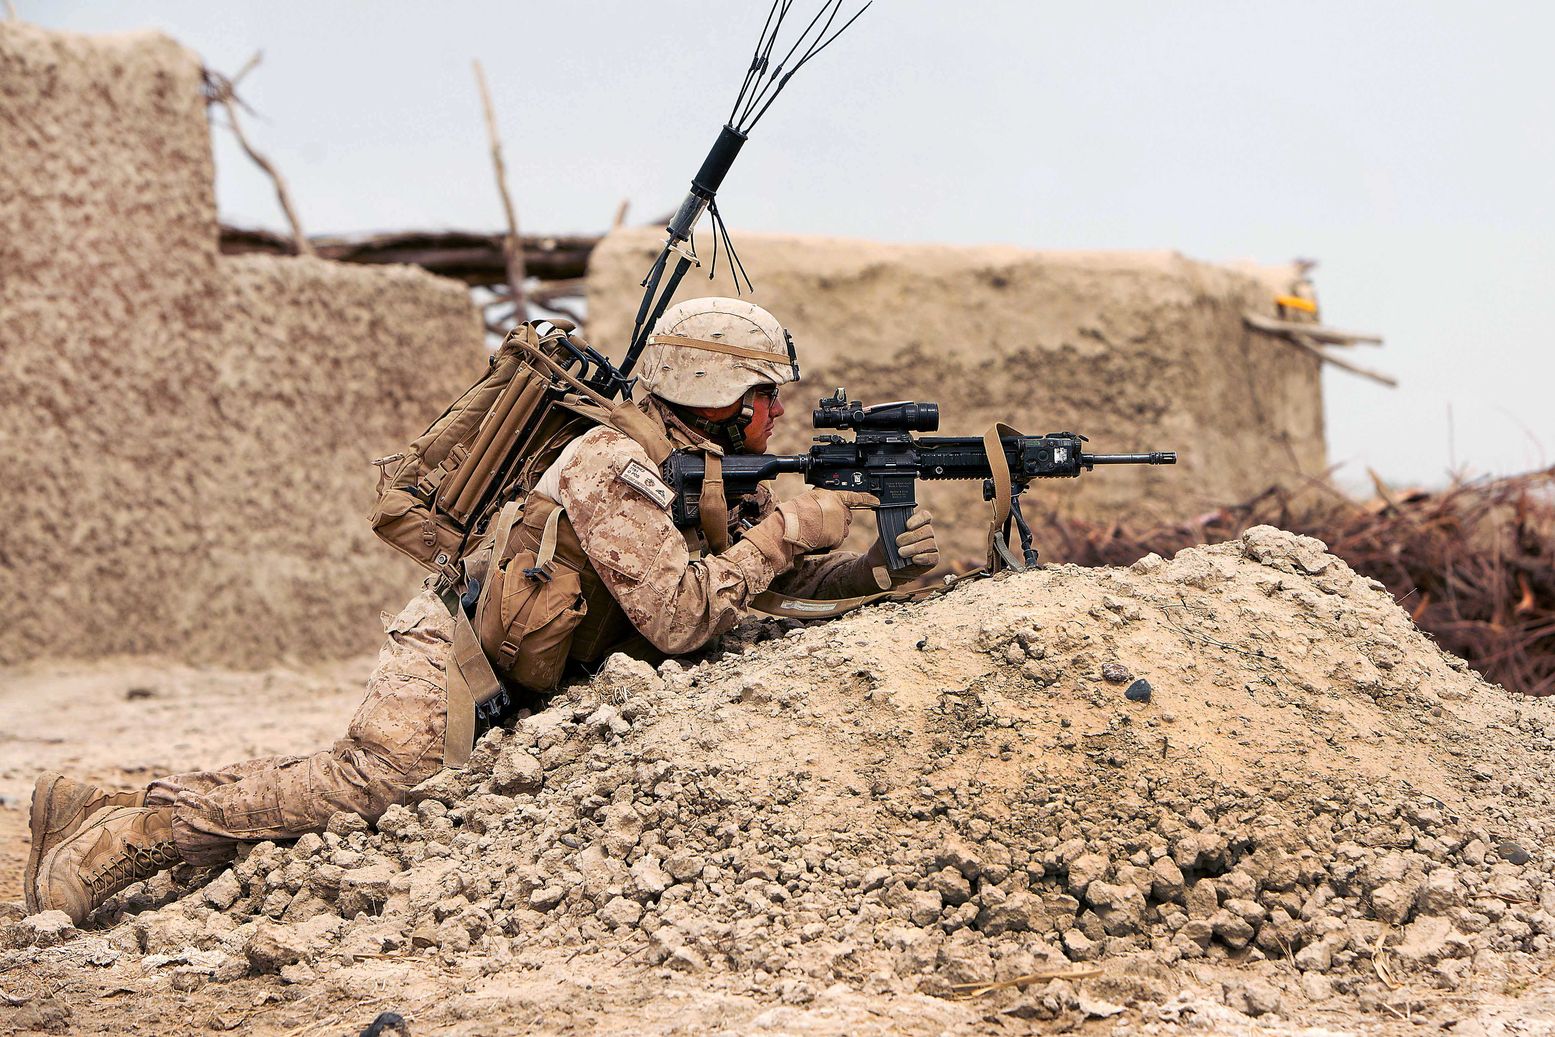 Newest sniper rifle for soldiers, Marines takes on 'final hurdle' before  fielding